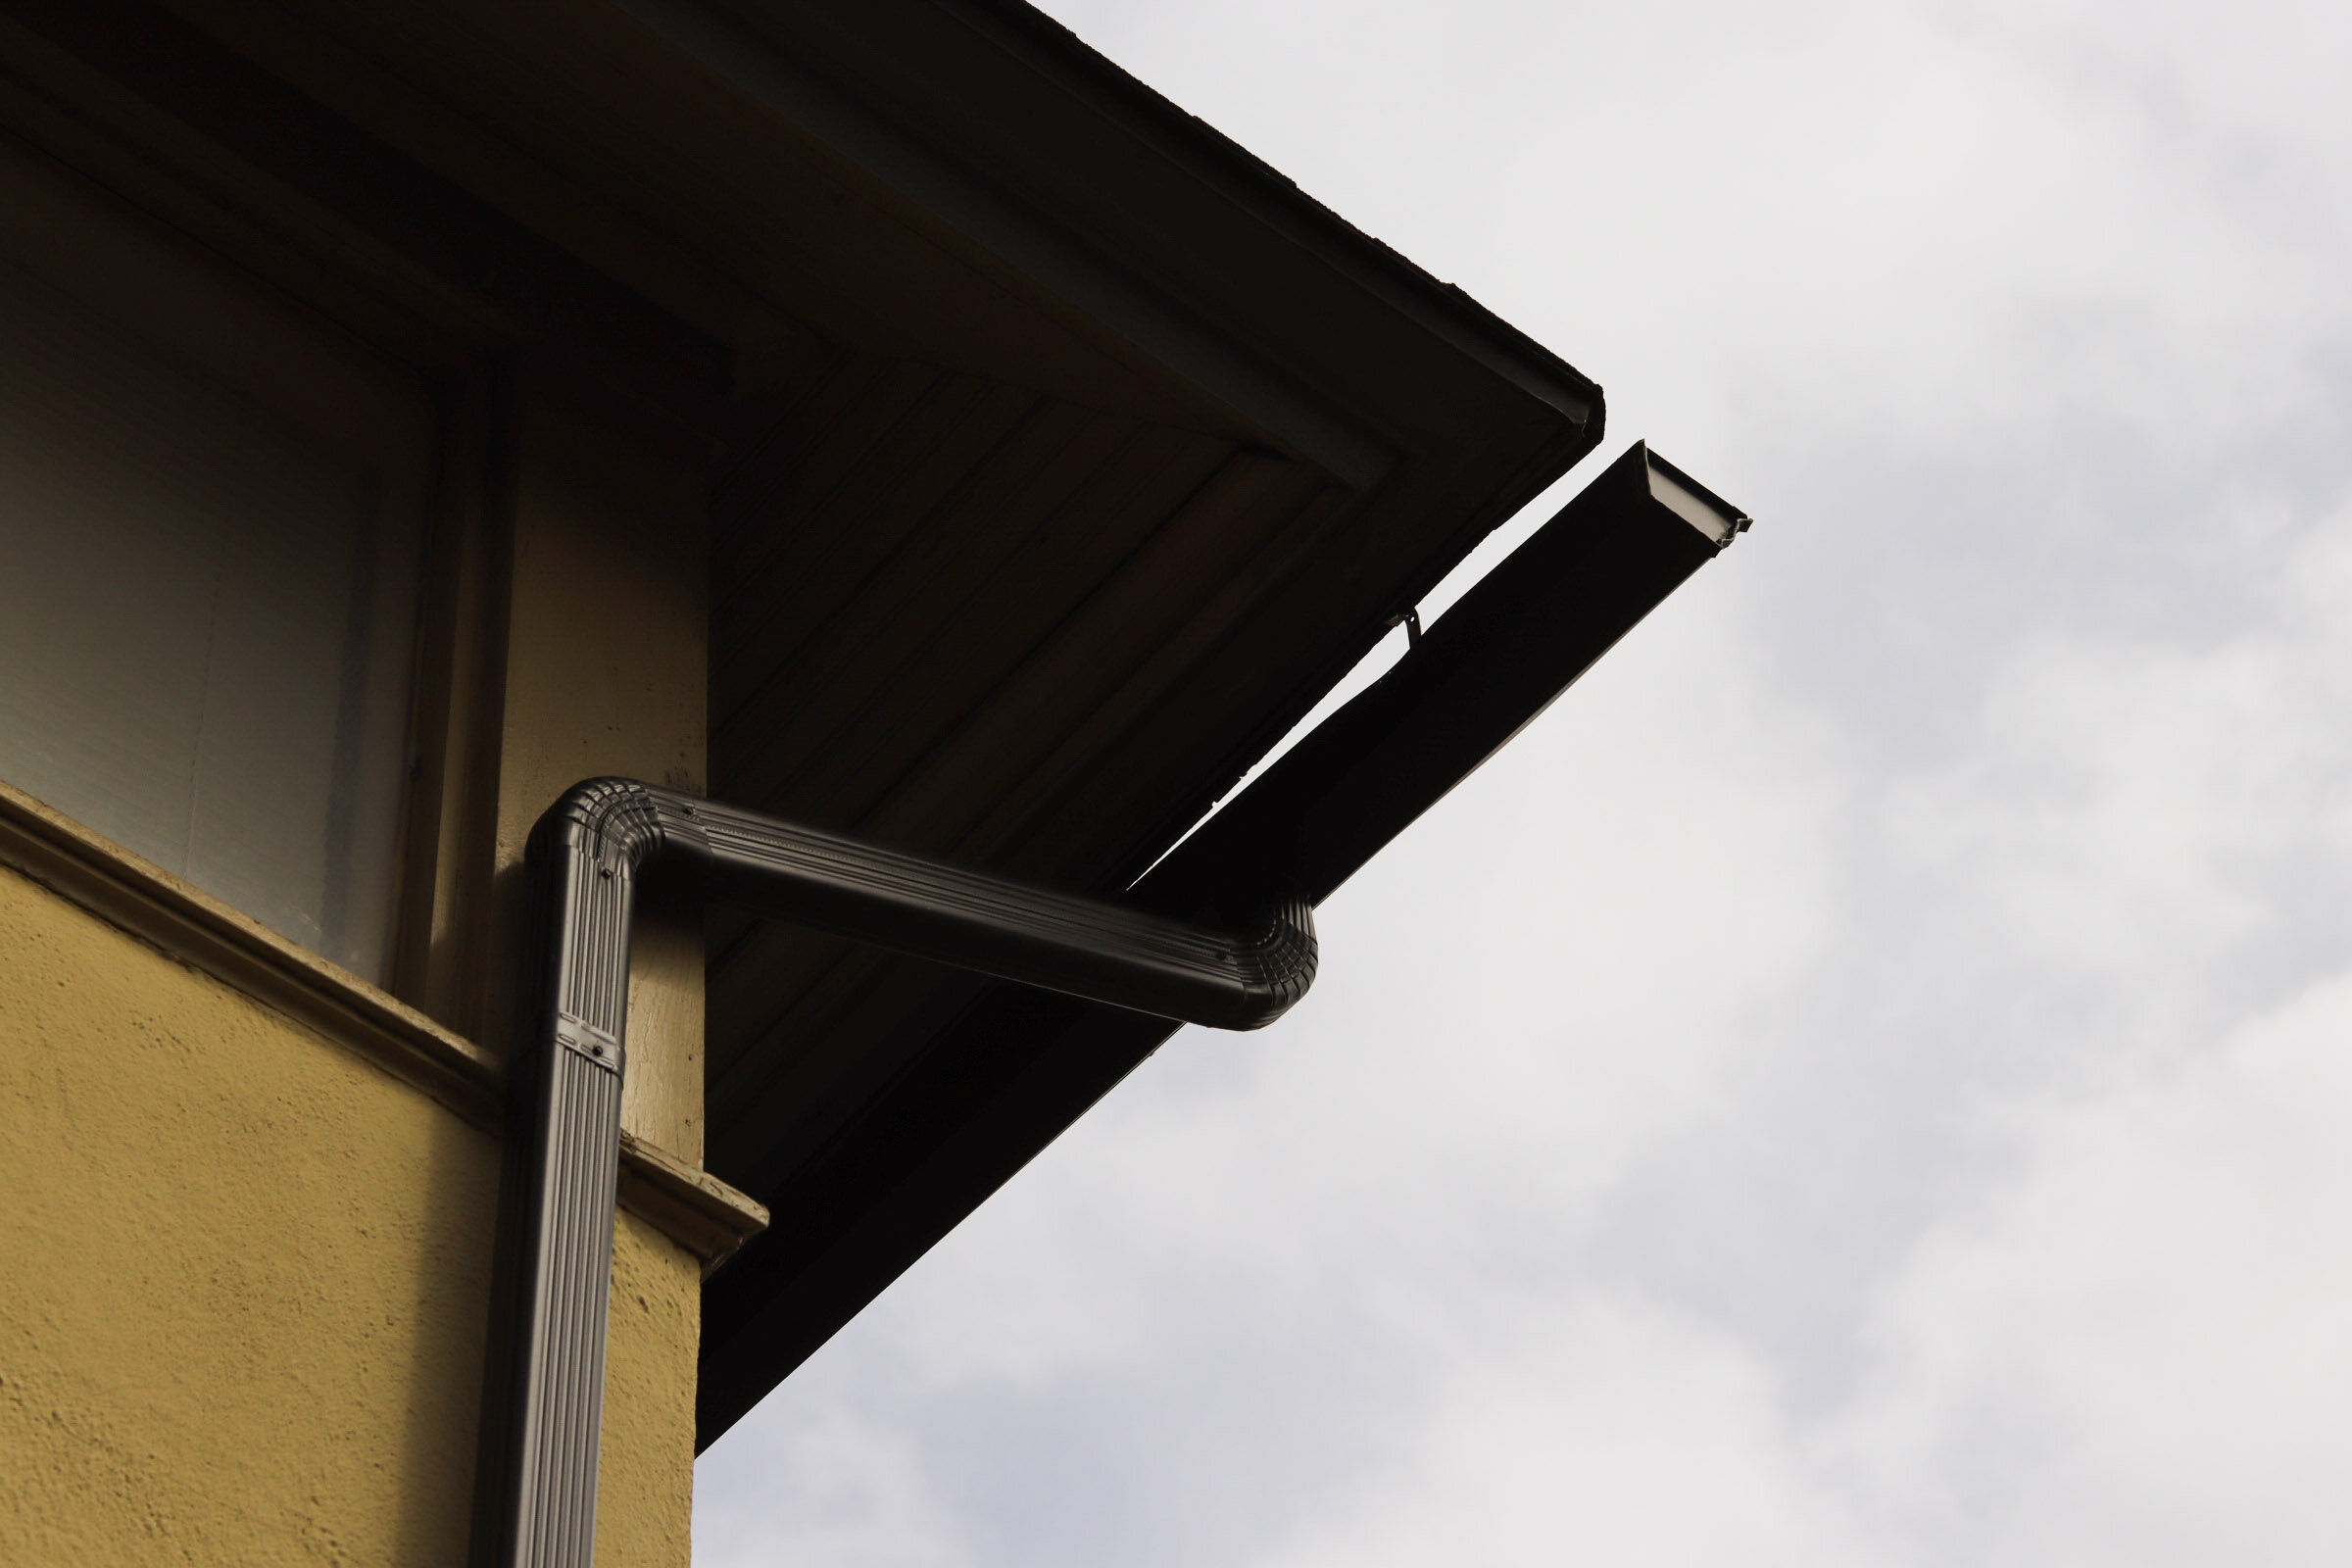 Clean your gutters and down spouts